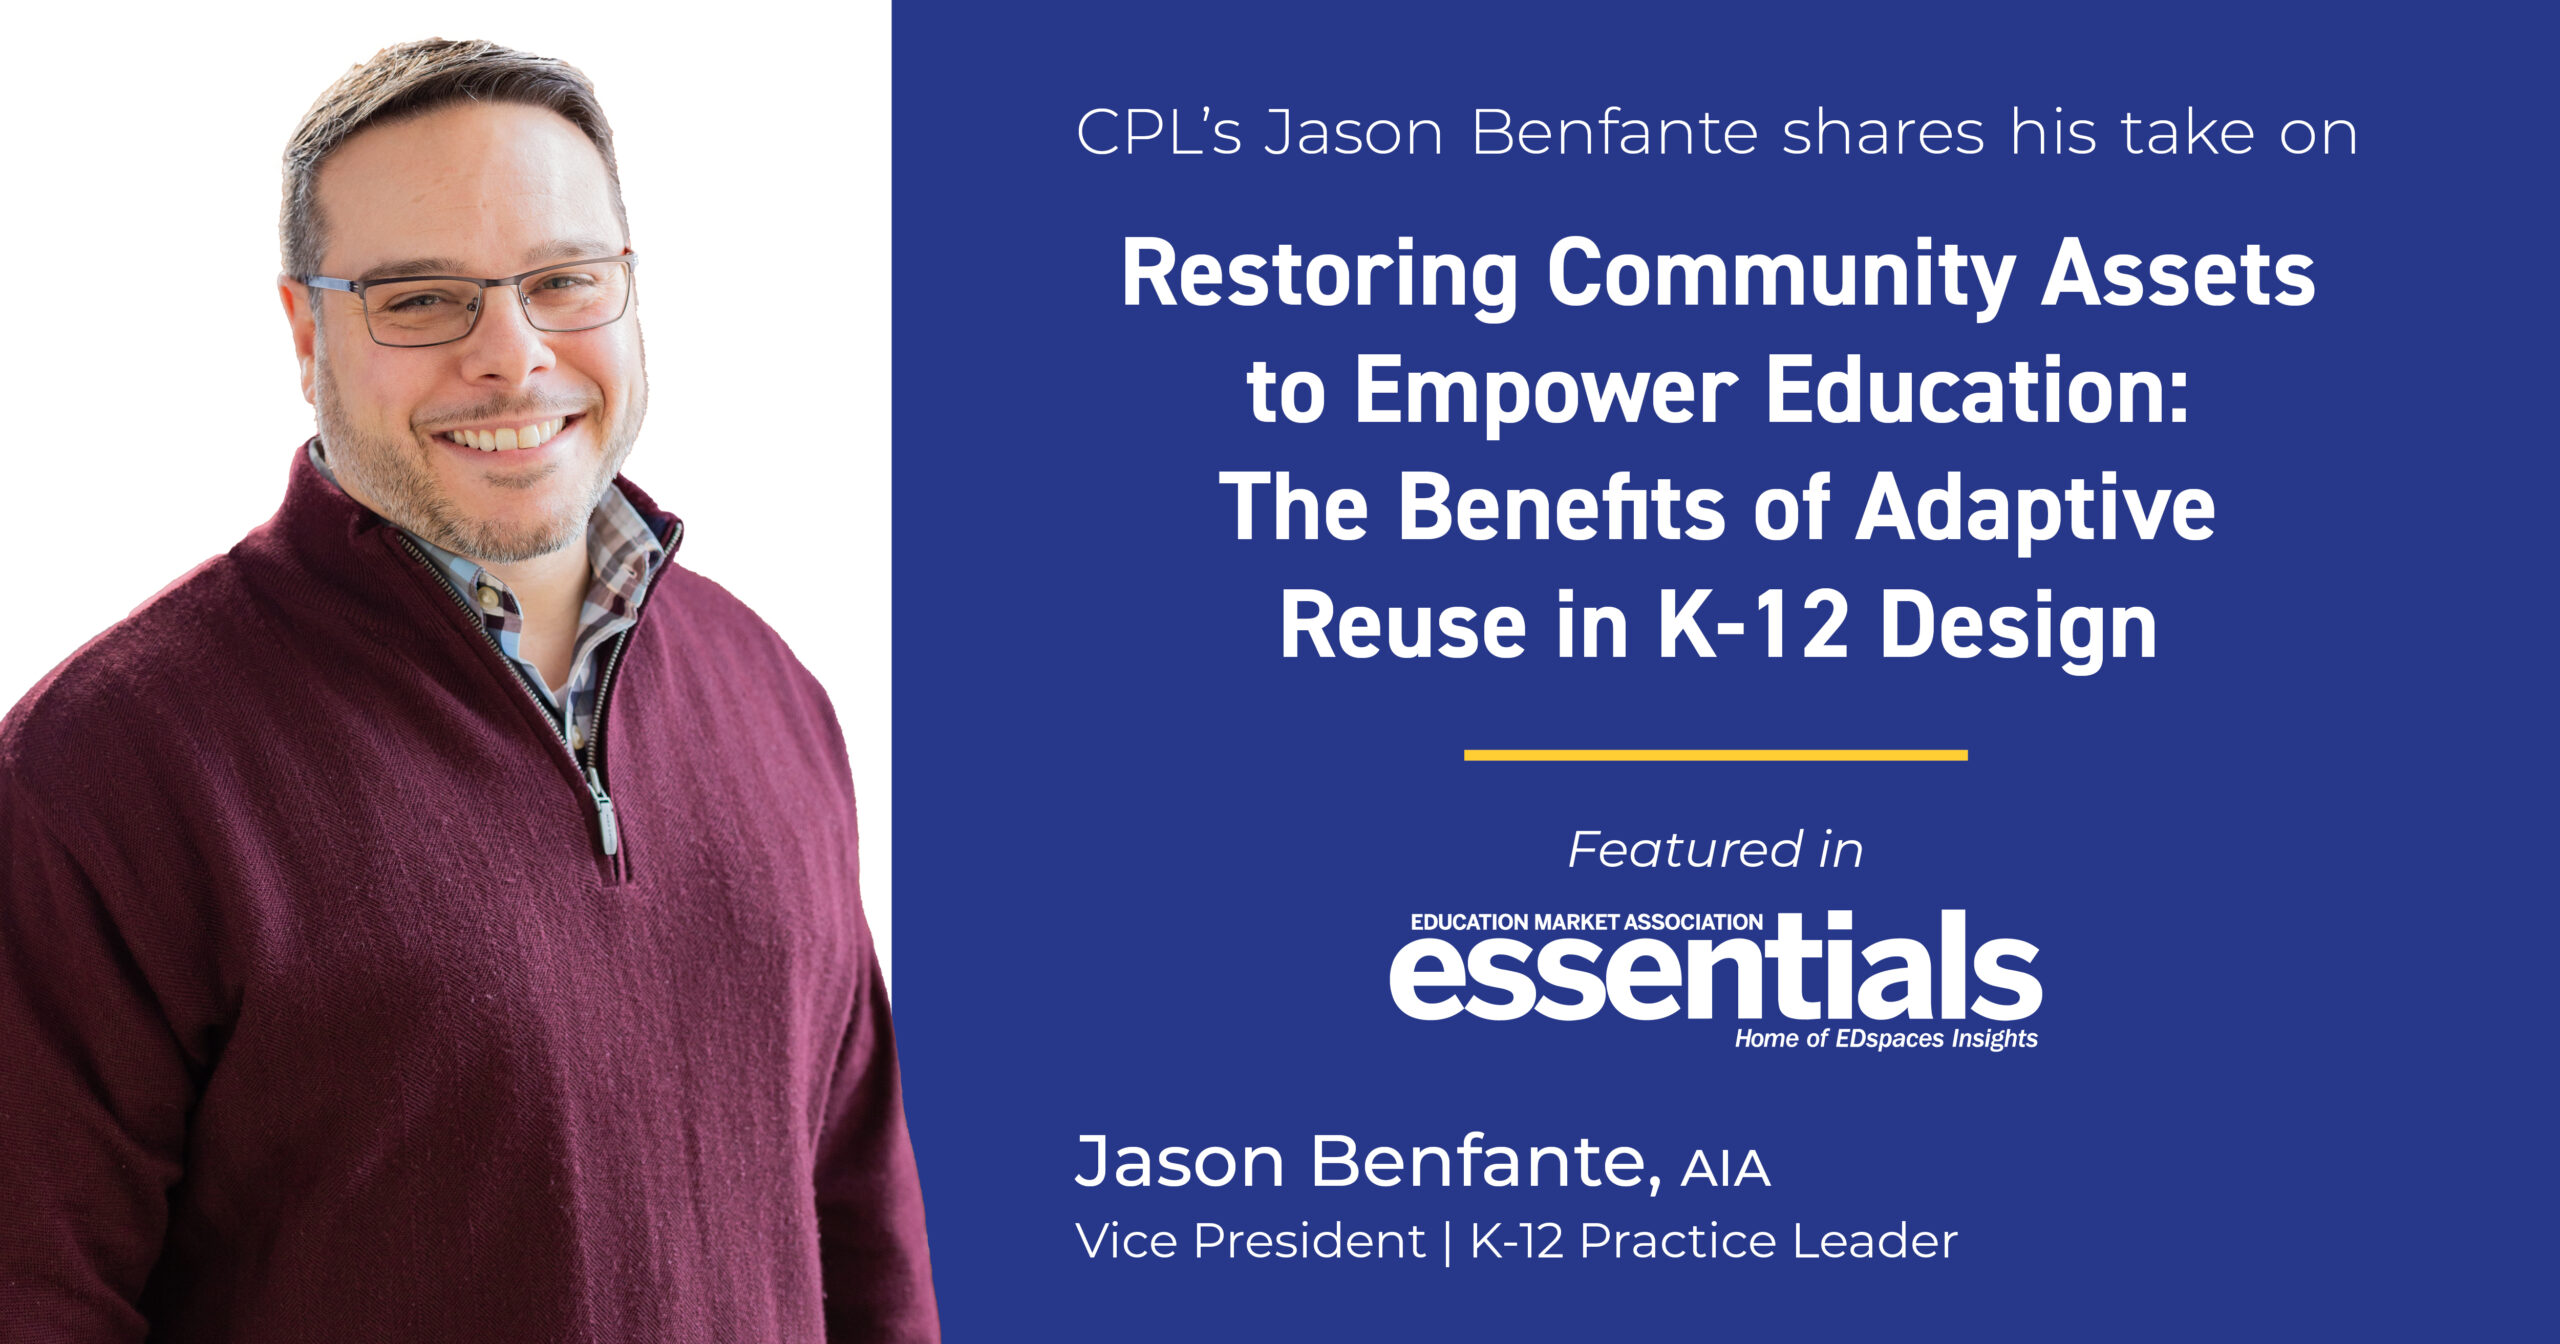 Jason Benfante in maroon sweater next to text "Jason Benfante shares his take on Restoring Communities to Empower Education: The Benefits of Adaptive Reuse in K-12 Education" Featured in Essentials (with logo) Jason Benfante, AIA, Souther Tier of New York Regional K-12 Leader and Vice President